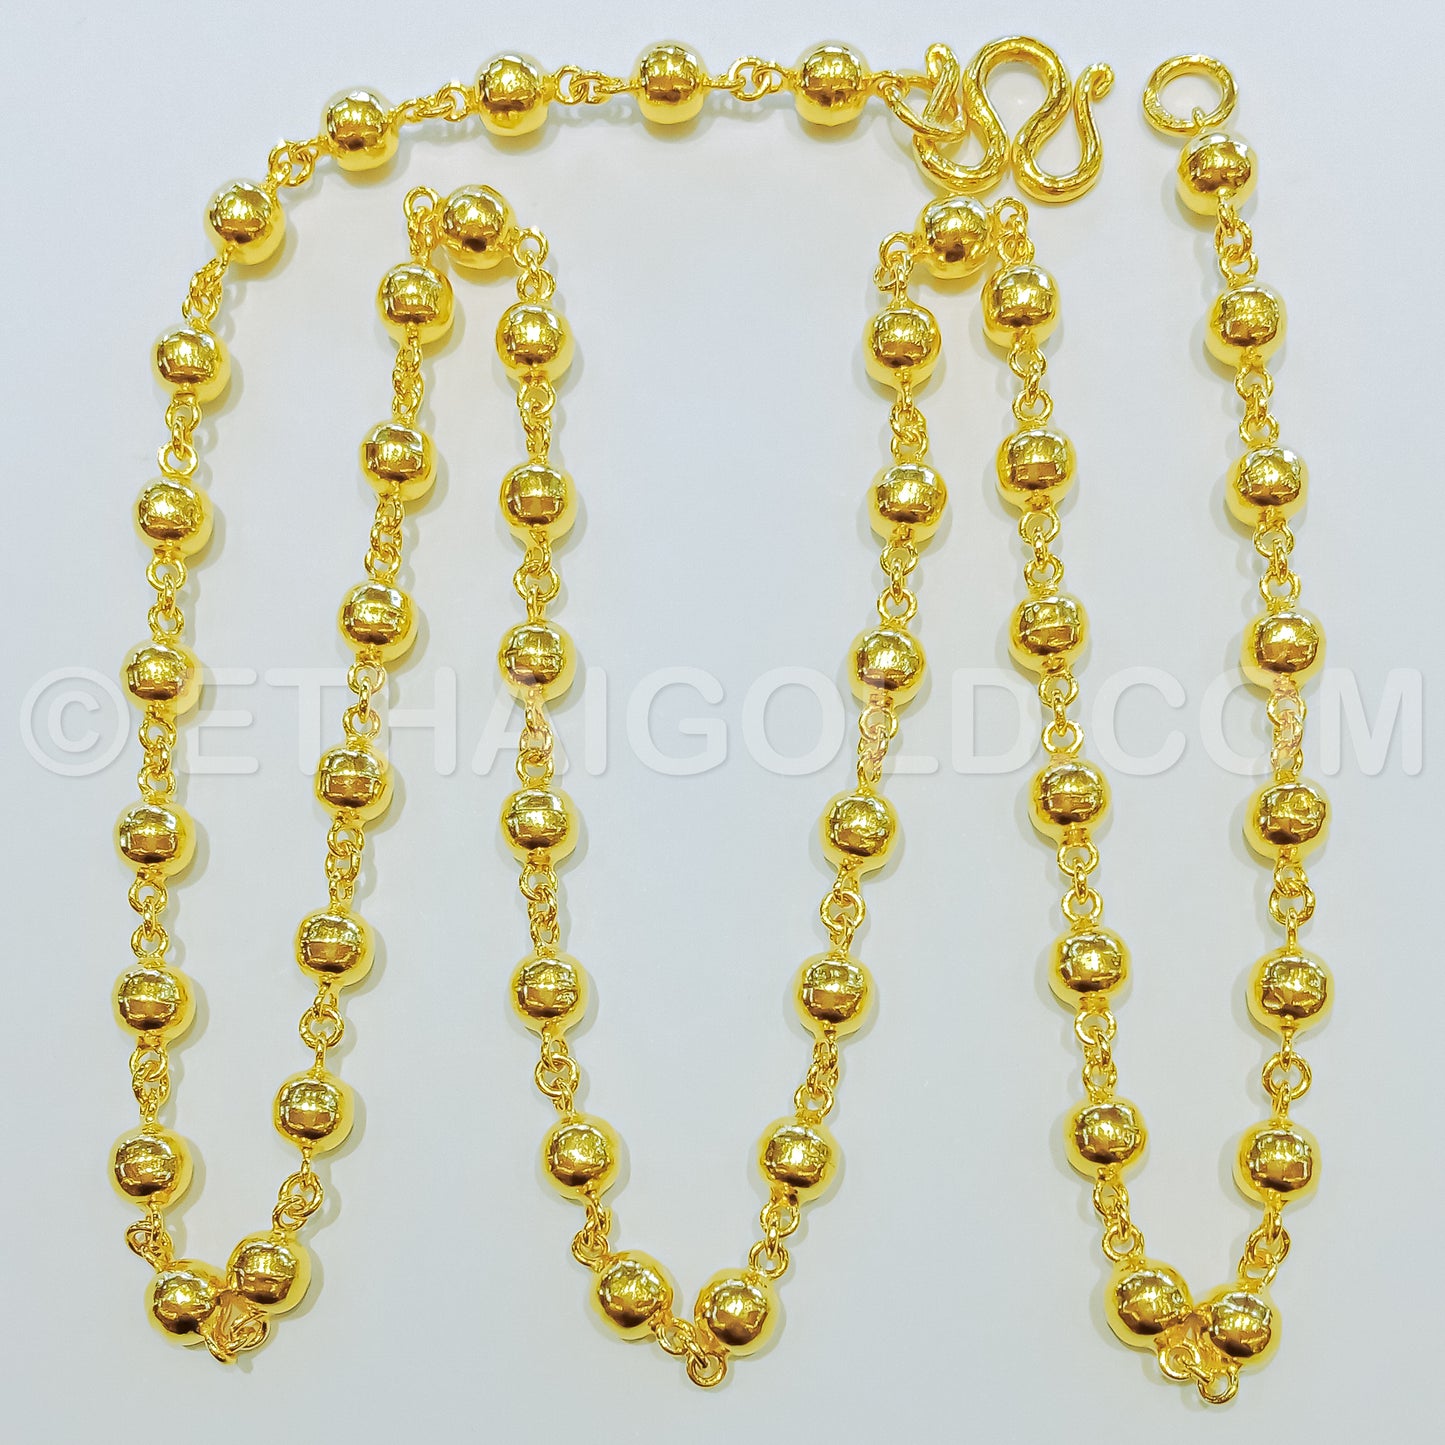 3 BAHT POLISHED HOLLOW ROSARY BEAD CHAIN NECKLACE IN 23K GOLD (ID: N3503B)